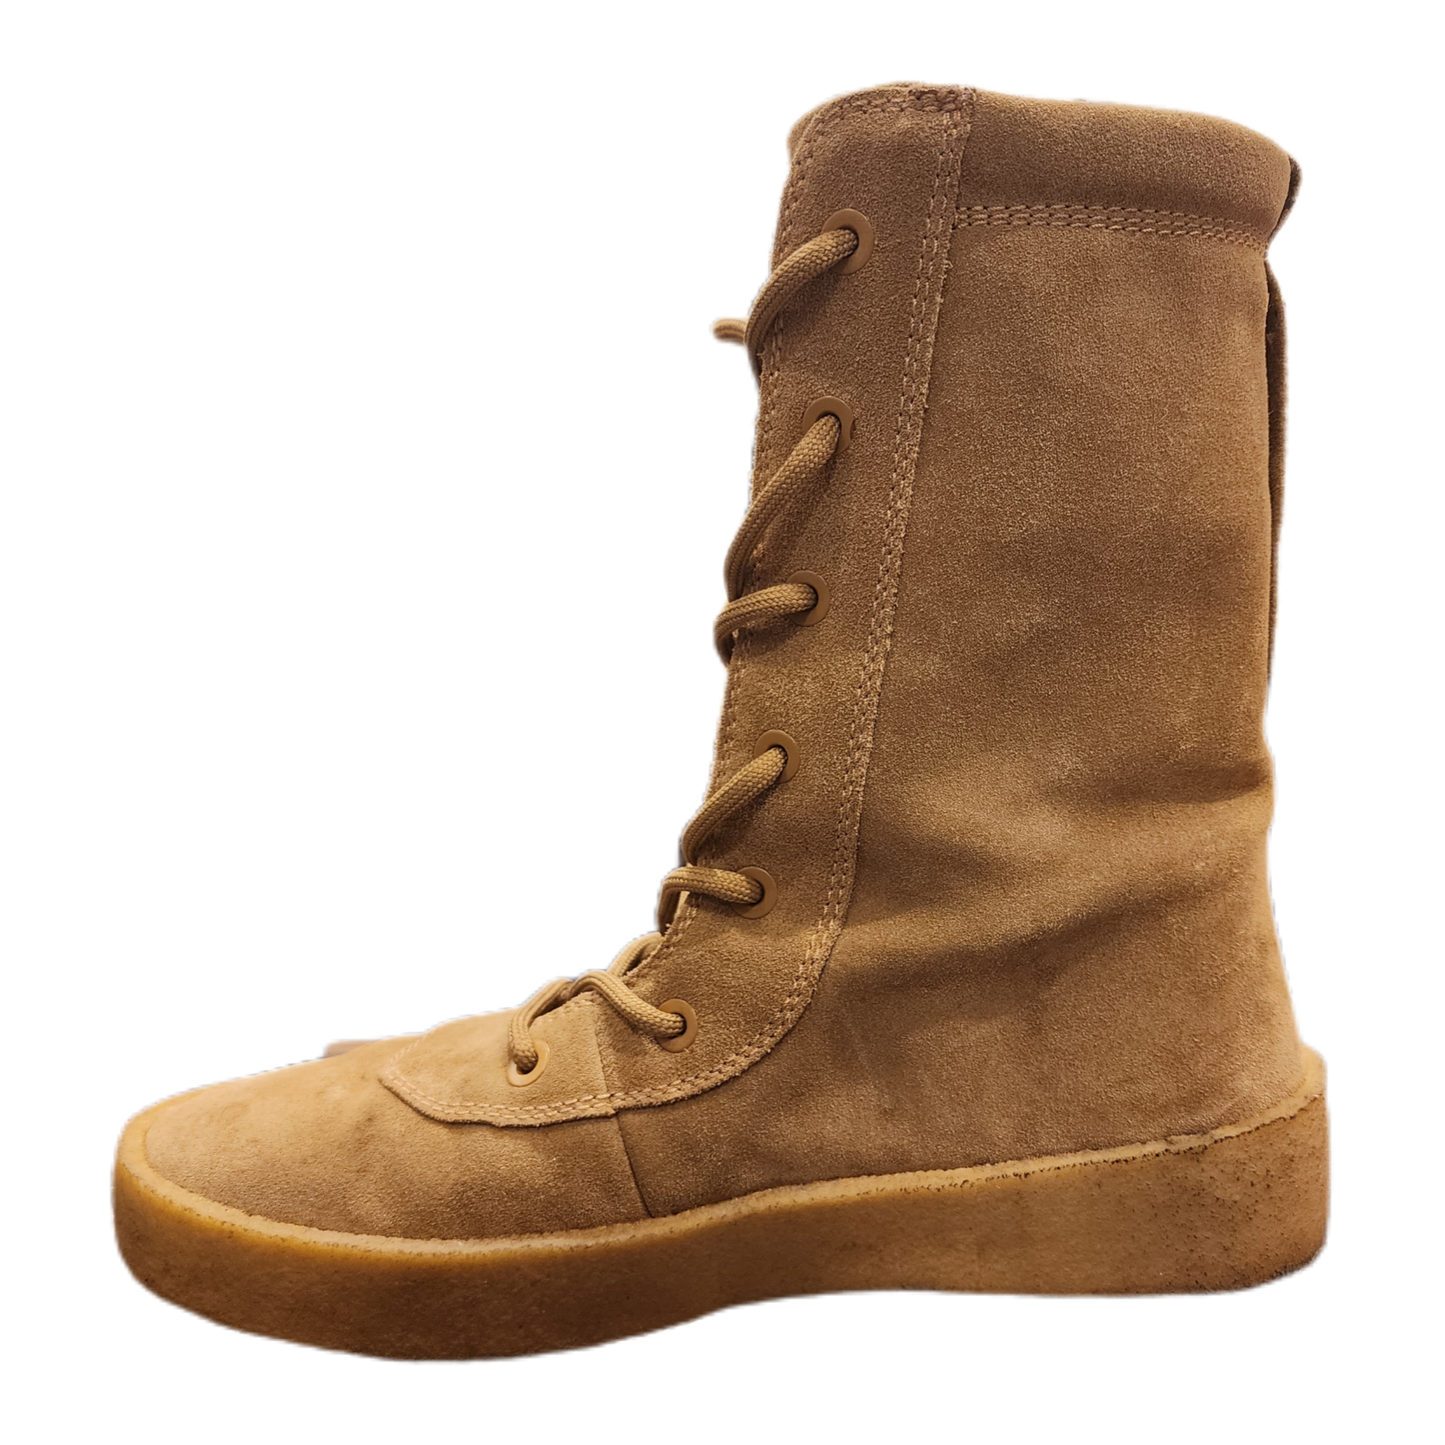 Yeezy - "Szn 4 Taupe Boot" - Size 11